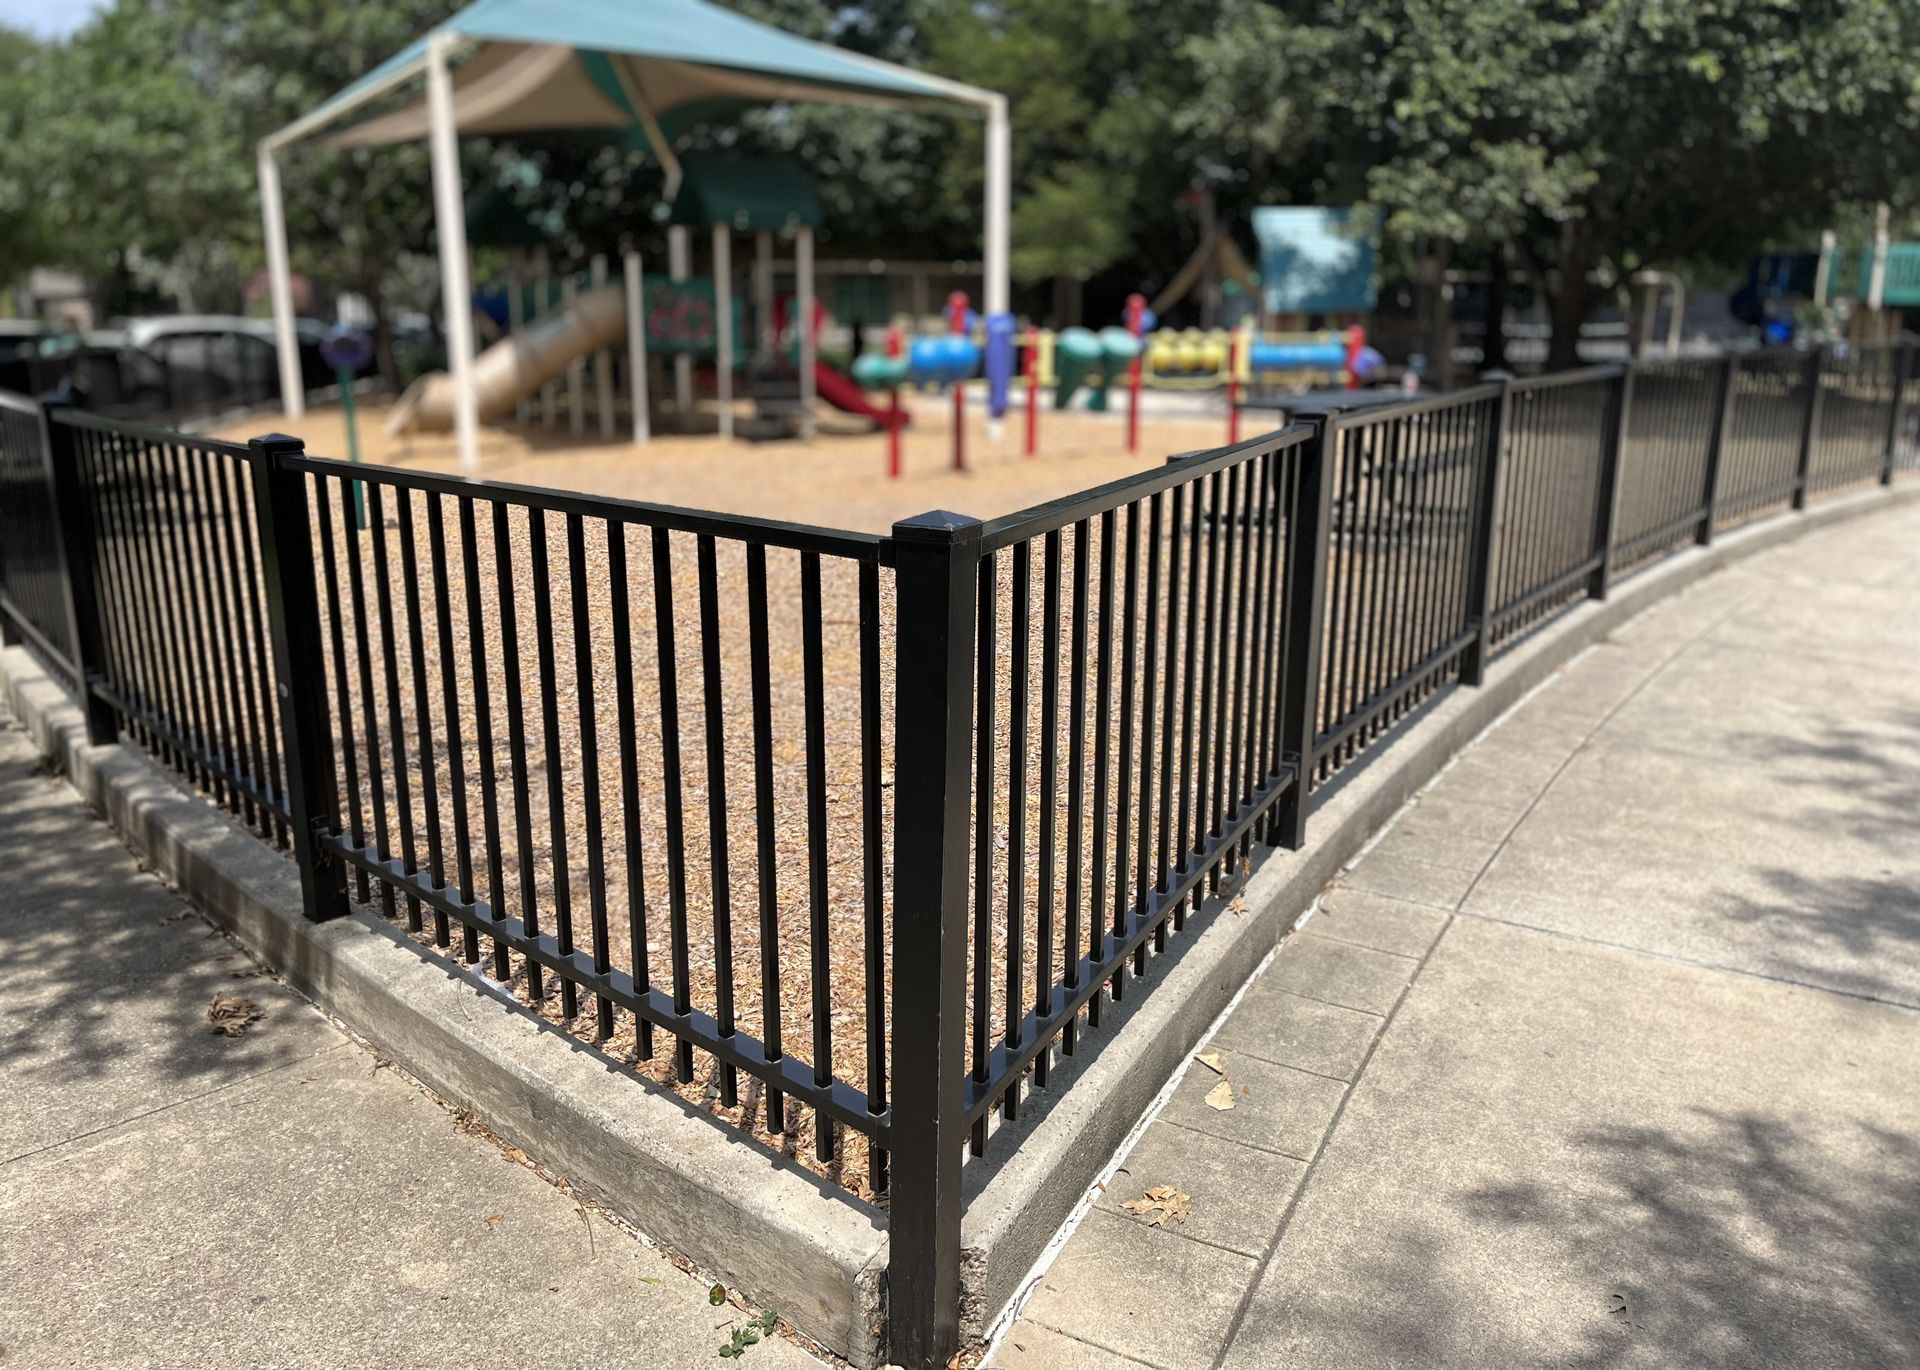 A wrought iron fence protecting a playground at a city park